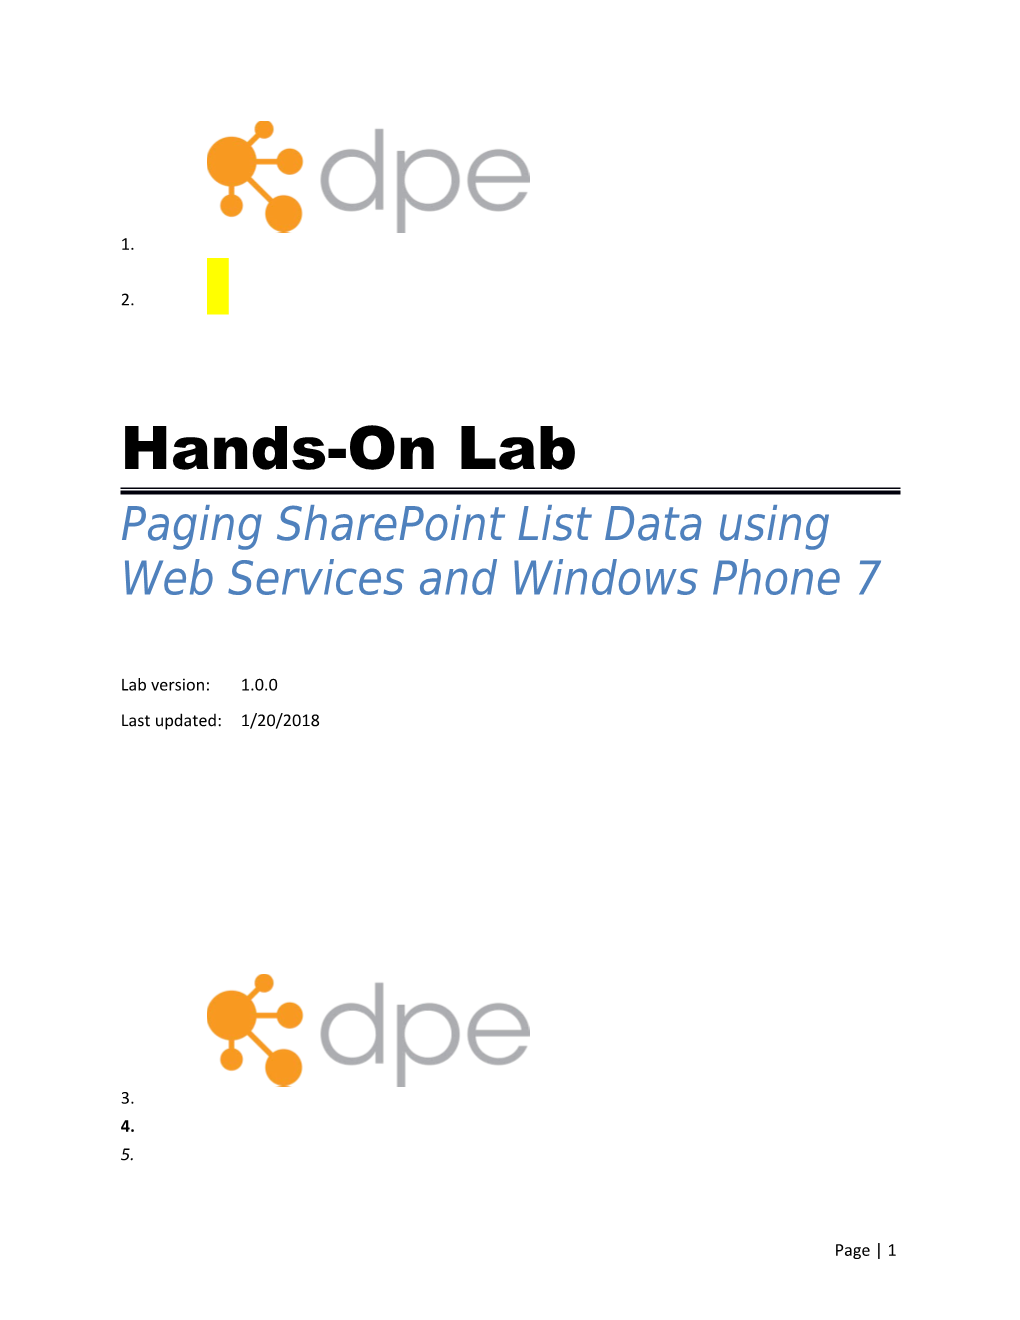 Paging Sharepoint List Data Using Web Services and Windows Phone 7